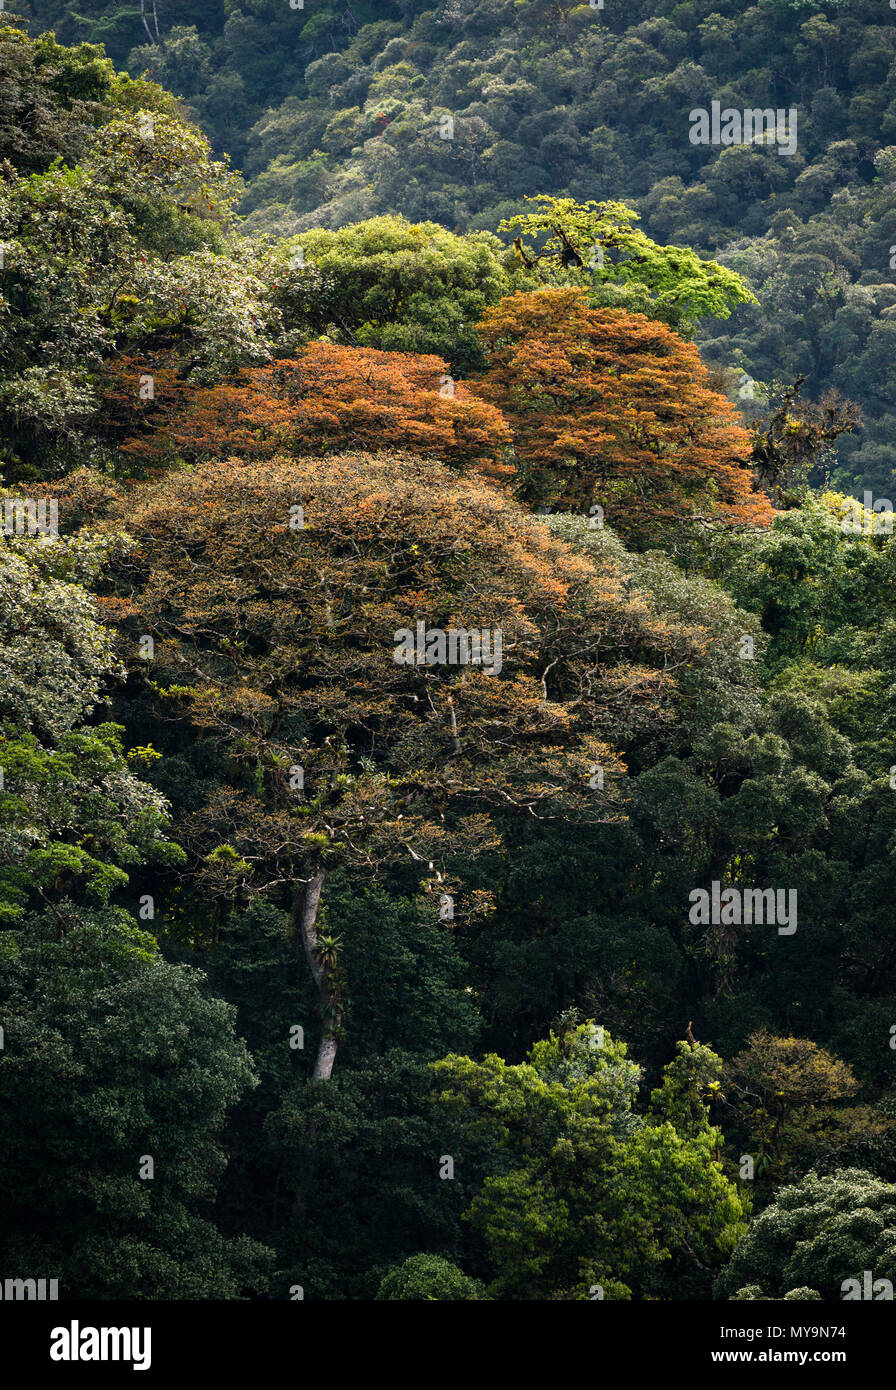 Big Jatobá trees (Hymenaea courbaril) with colorful new leaves, in primary Atlantic Rainforest of SE Brazil. Stock Photo